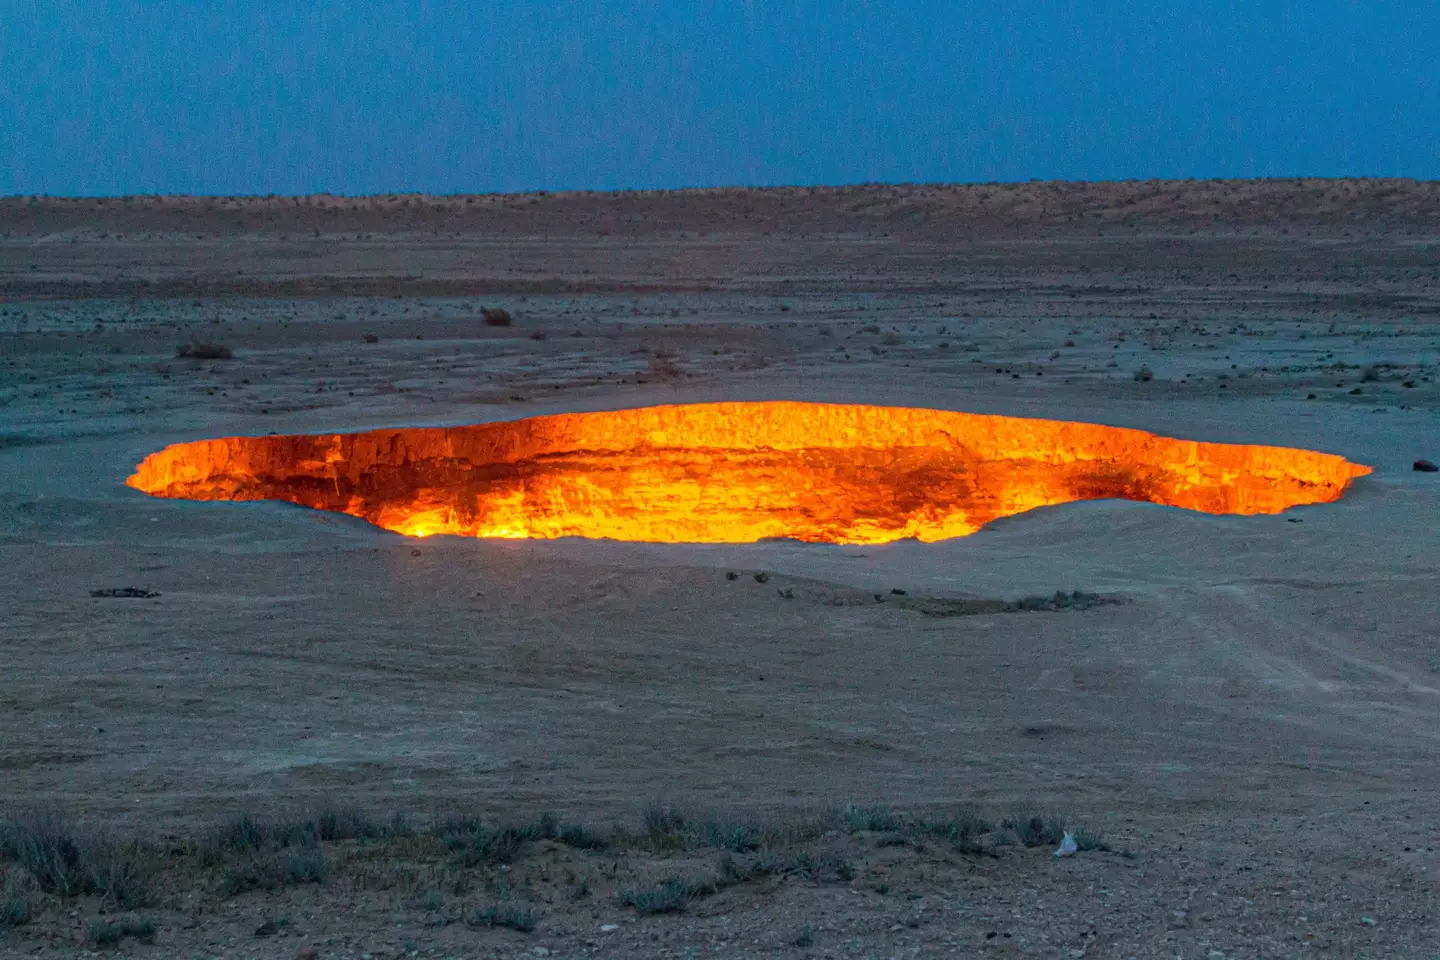 The hole has burning for more than 50 years.